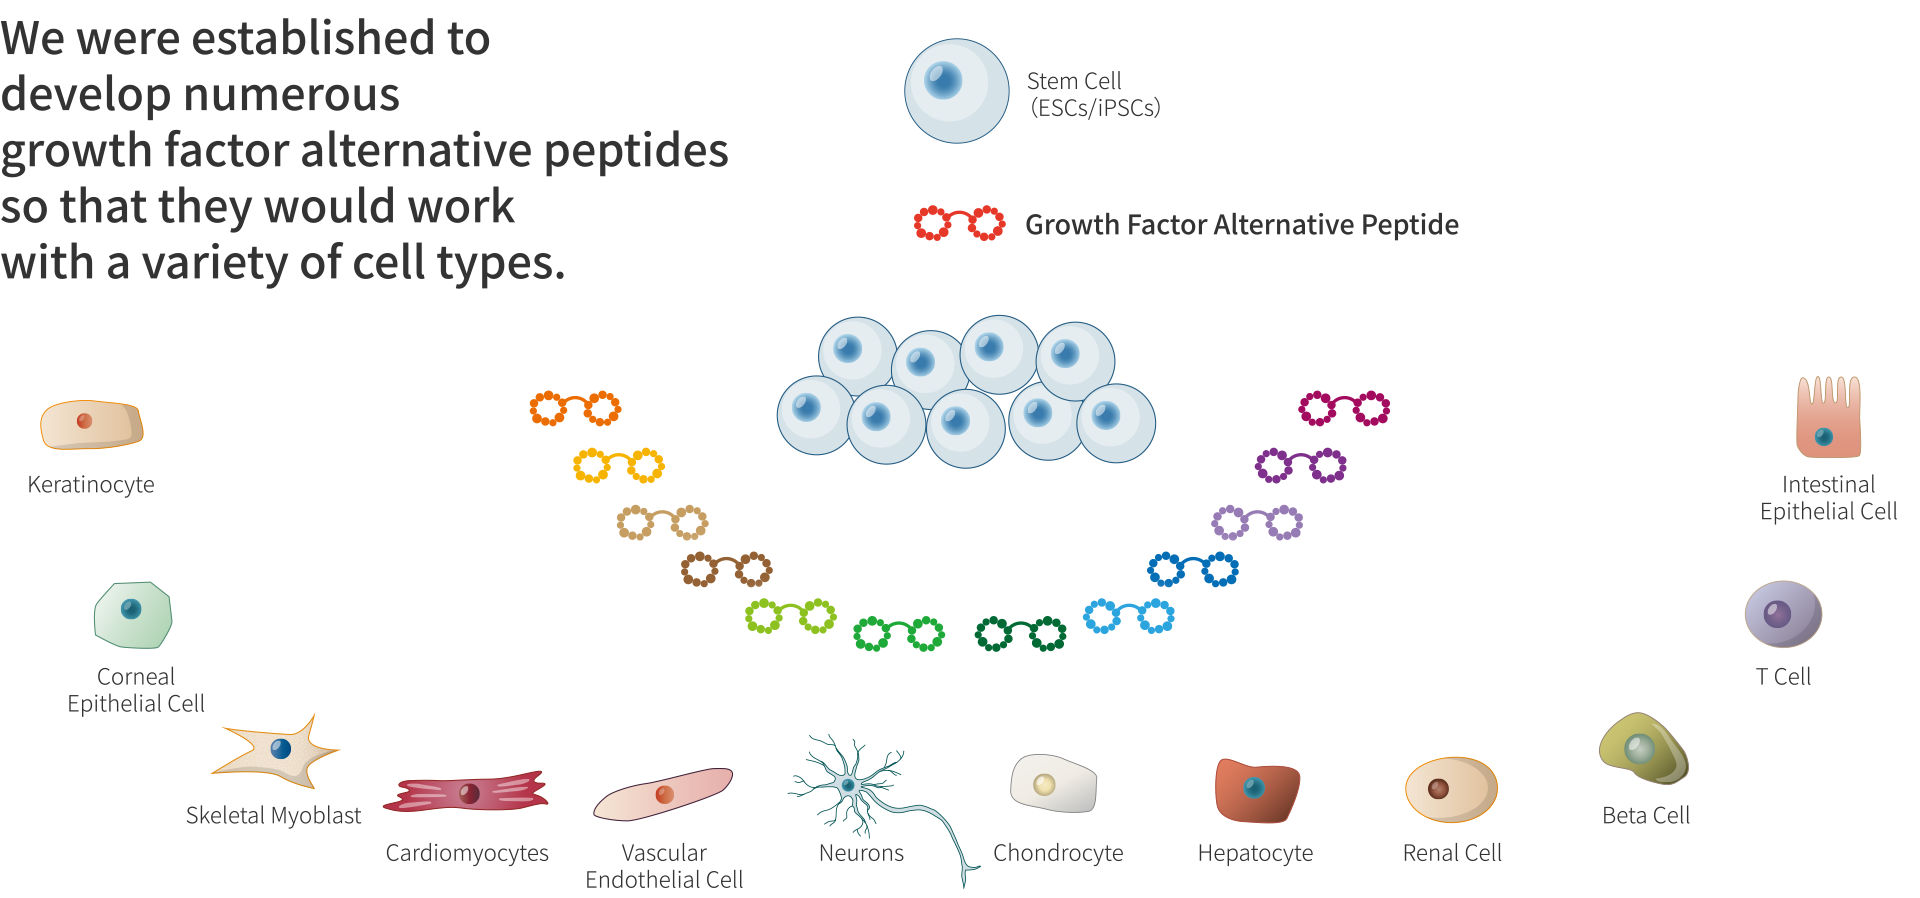 We were established to develop numerous growth factor alternative peptides so that they would work with a variety of cell types